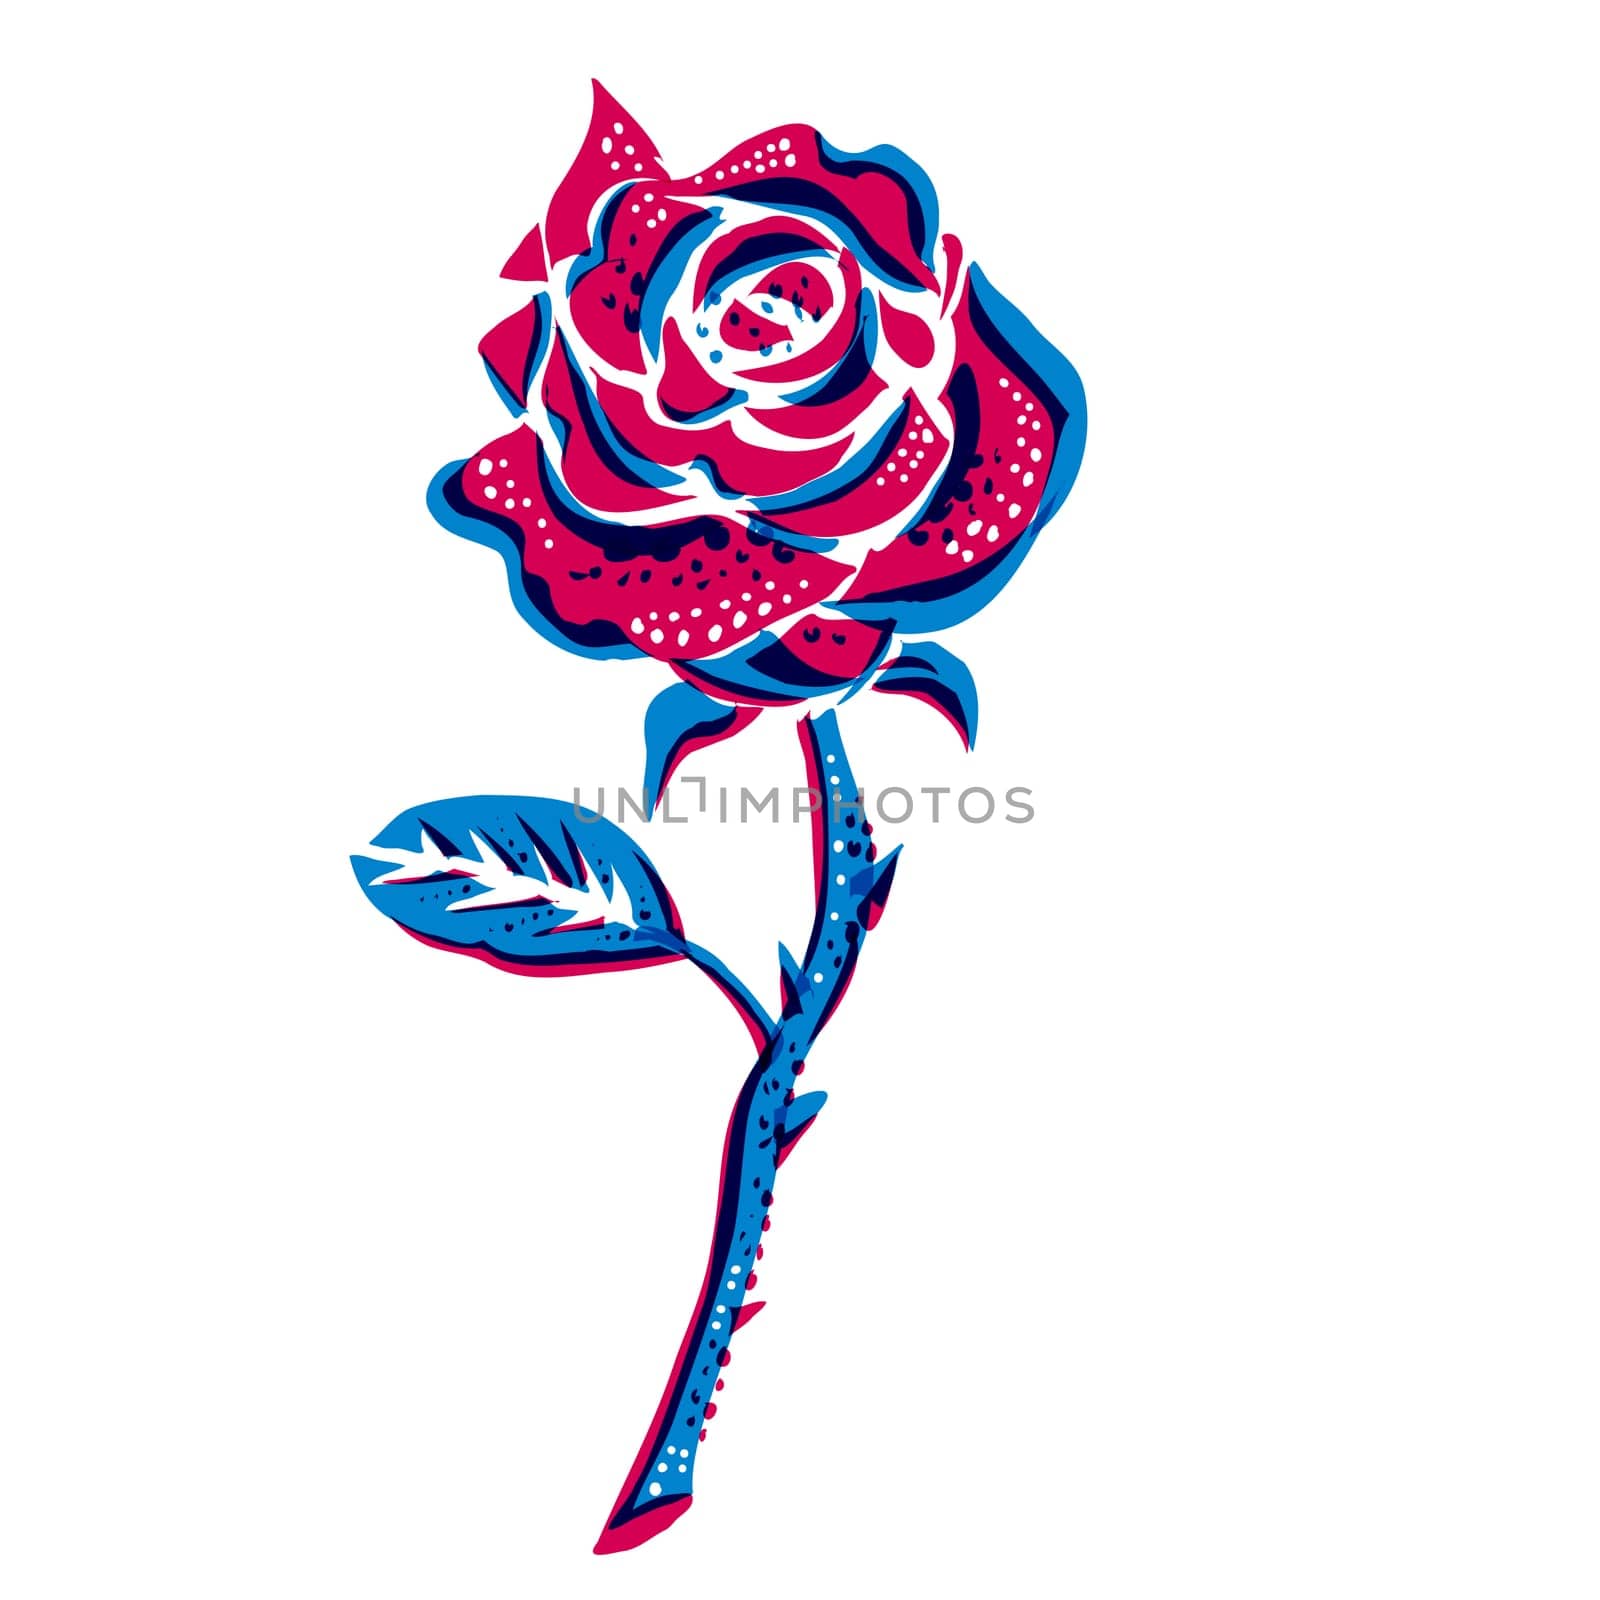 Risograph technique illustration of a red rose with stem done in retro riso effect digital screen printing style.
